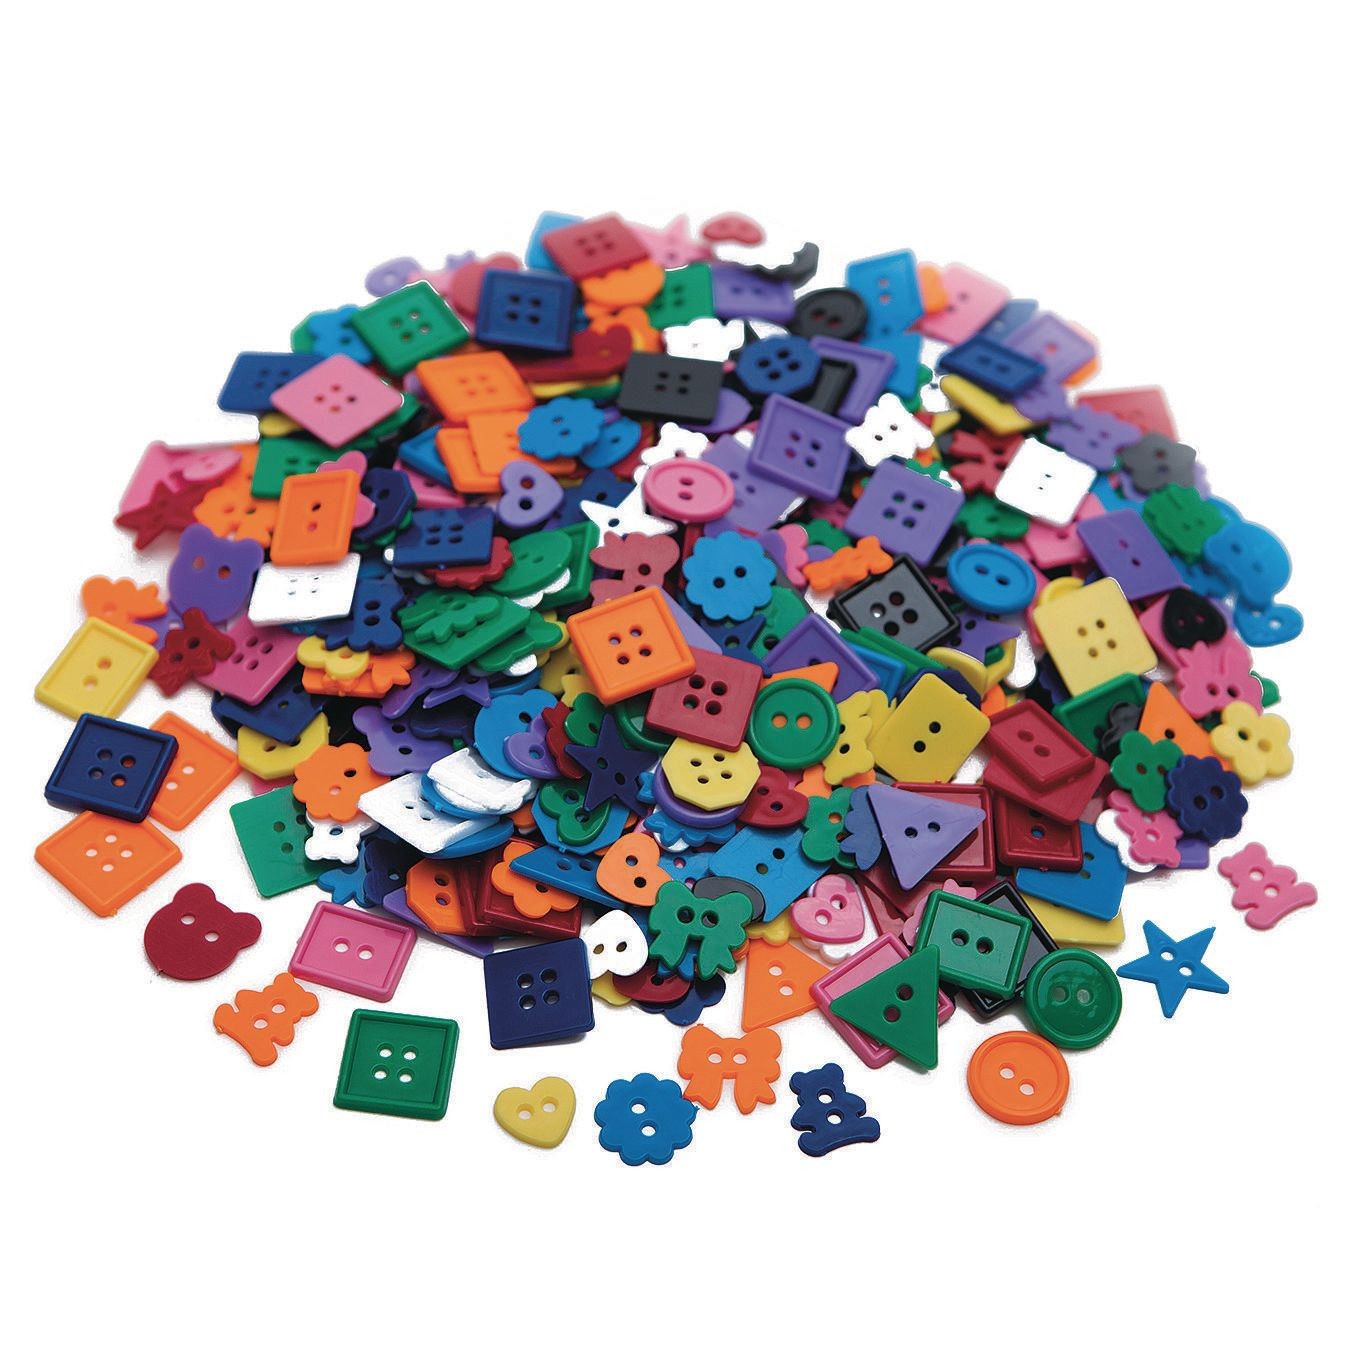 Assorted Shaped Button 1-lb Bag from S&S Worldwide